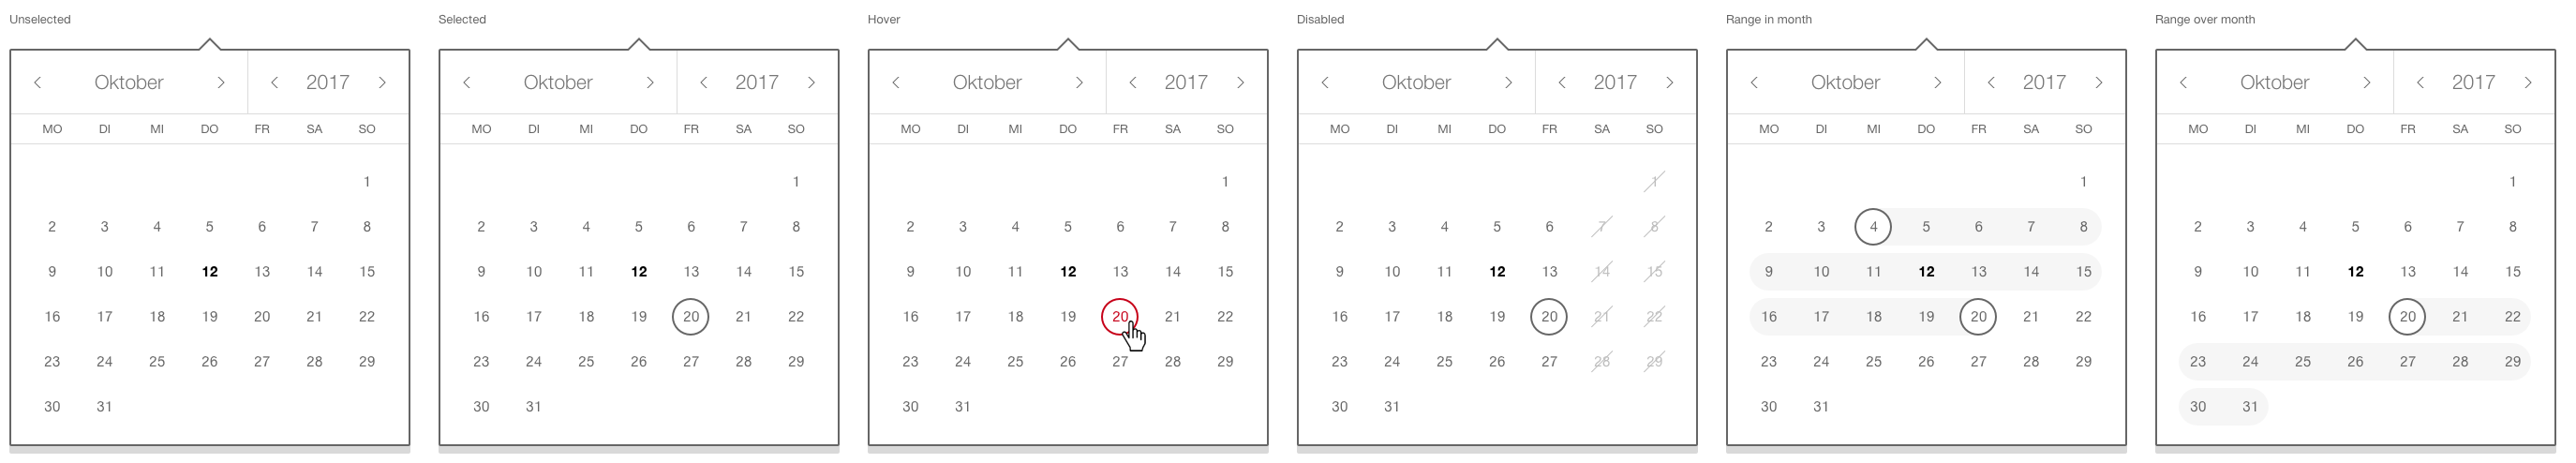 Image of the datepicker component with visible date layer